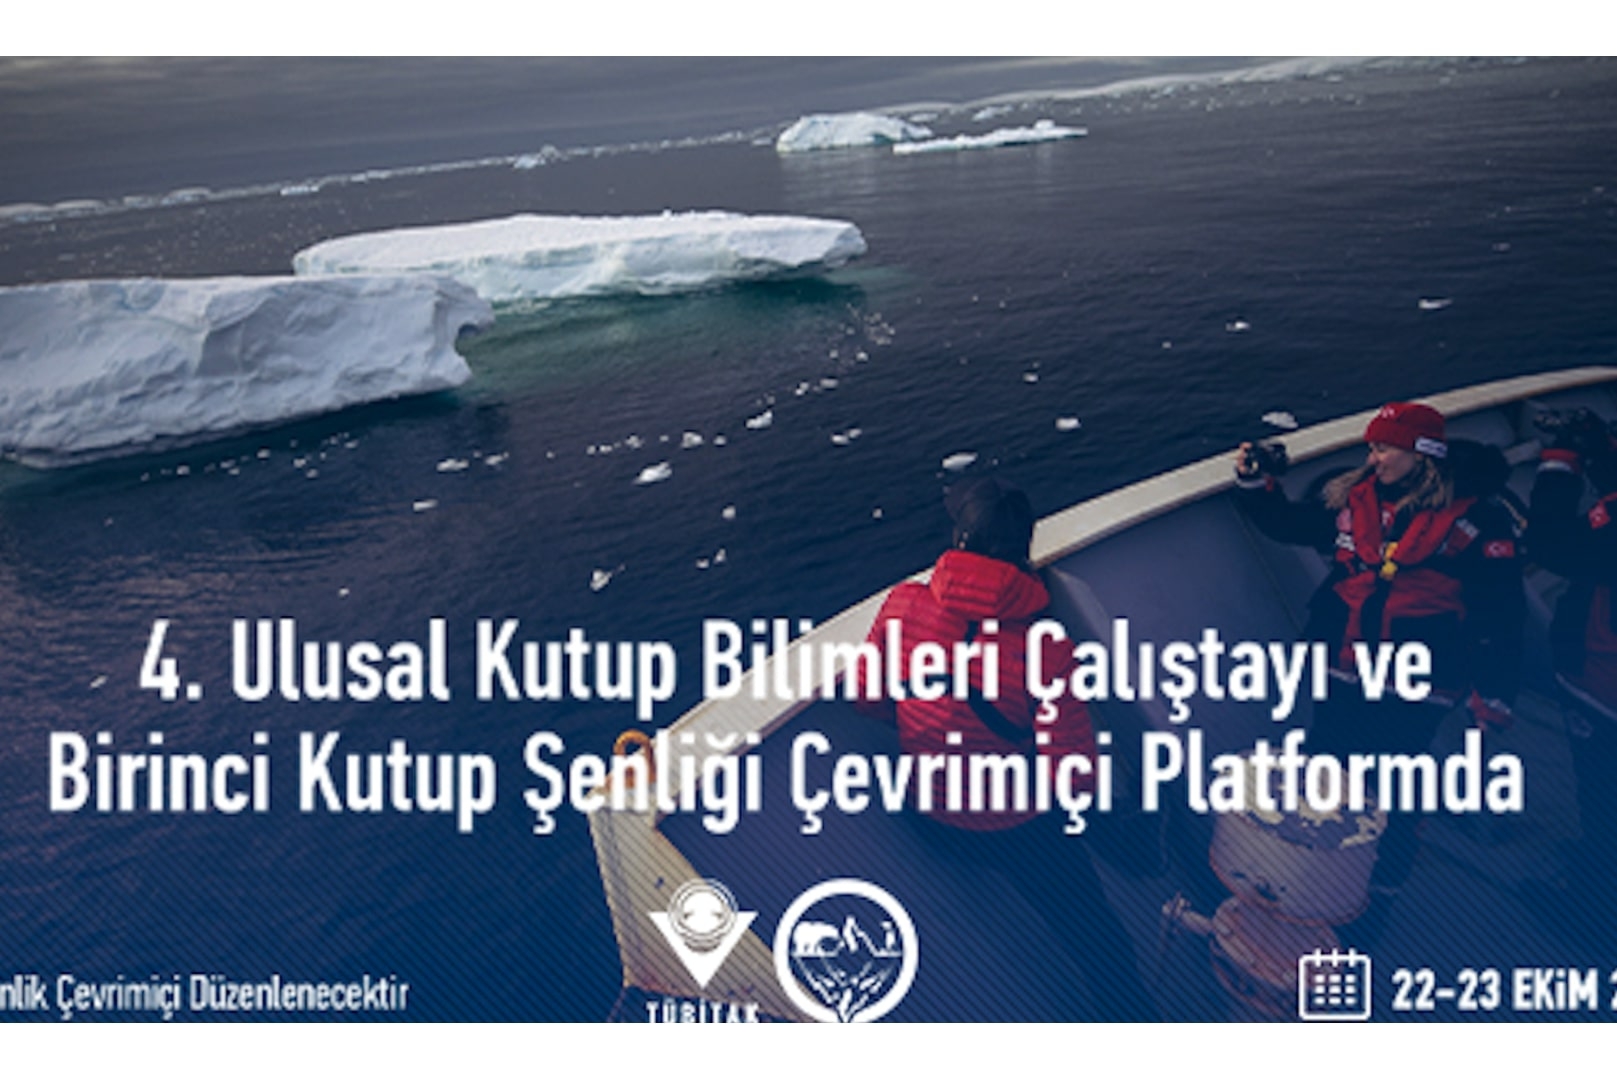 Sıtkı Egeli to present his paper at the "4th Polar Sciences Research Workshop"